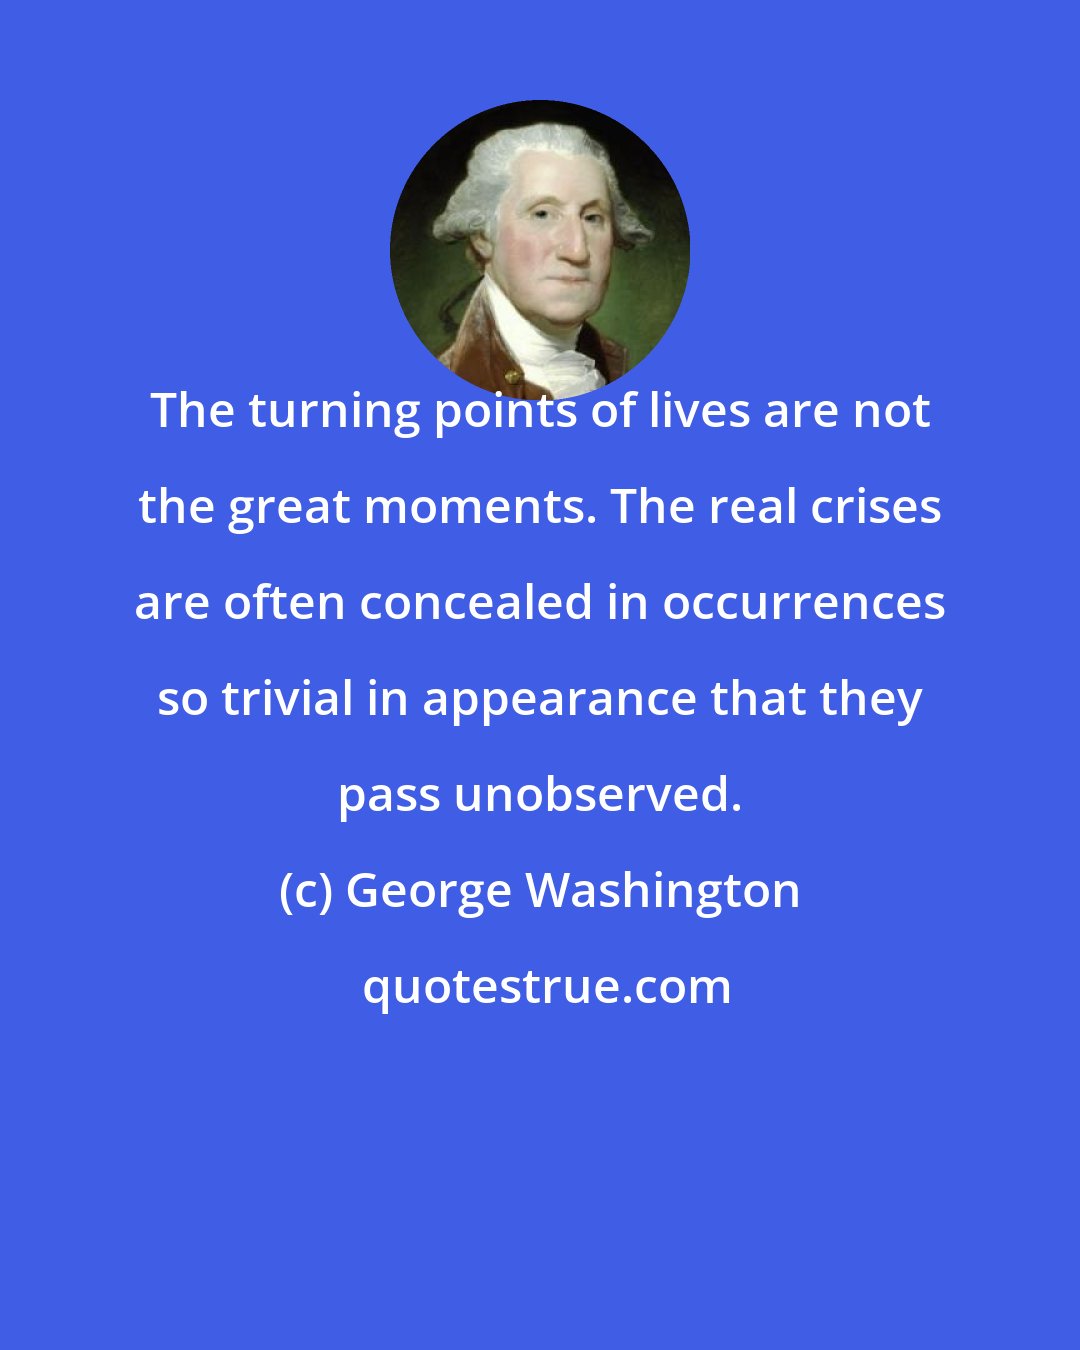 George Washington: The turning points of lives are not the great moments. The real crises are often concealed in occurrences so trivial in appearance that they pass unobserved.